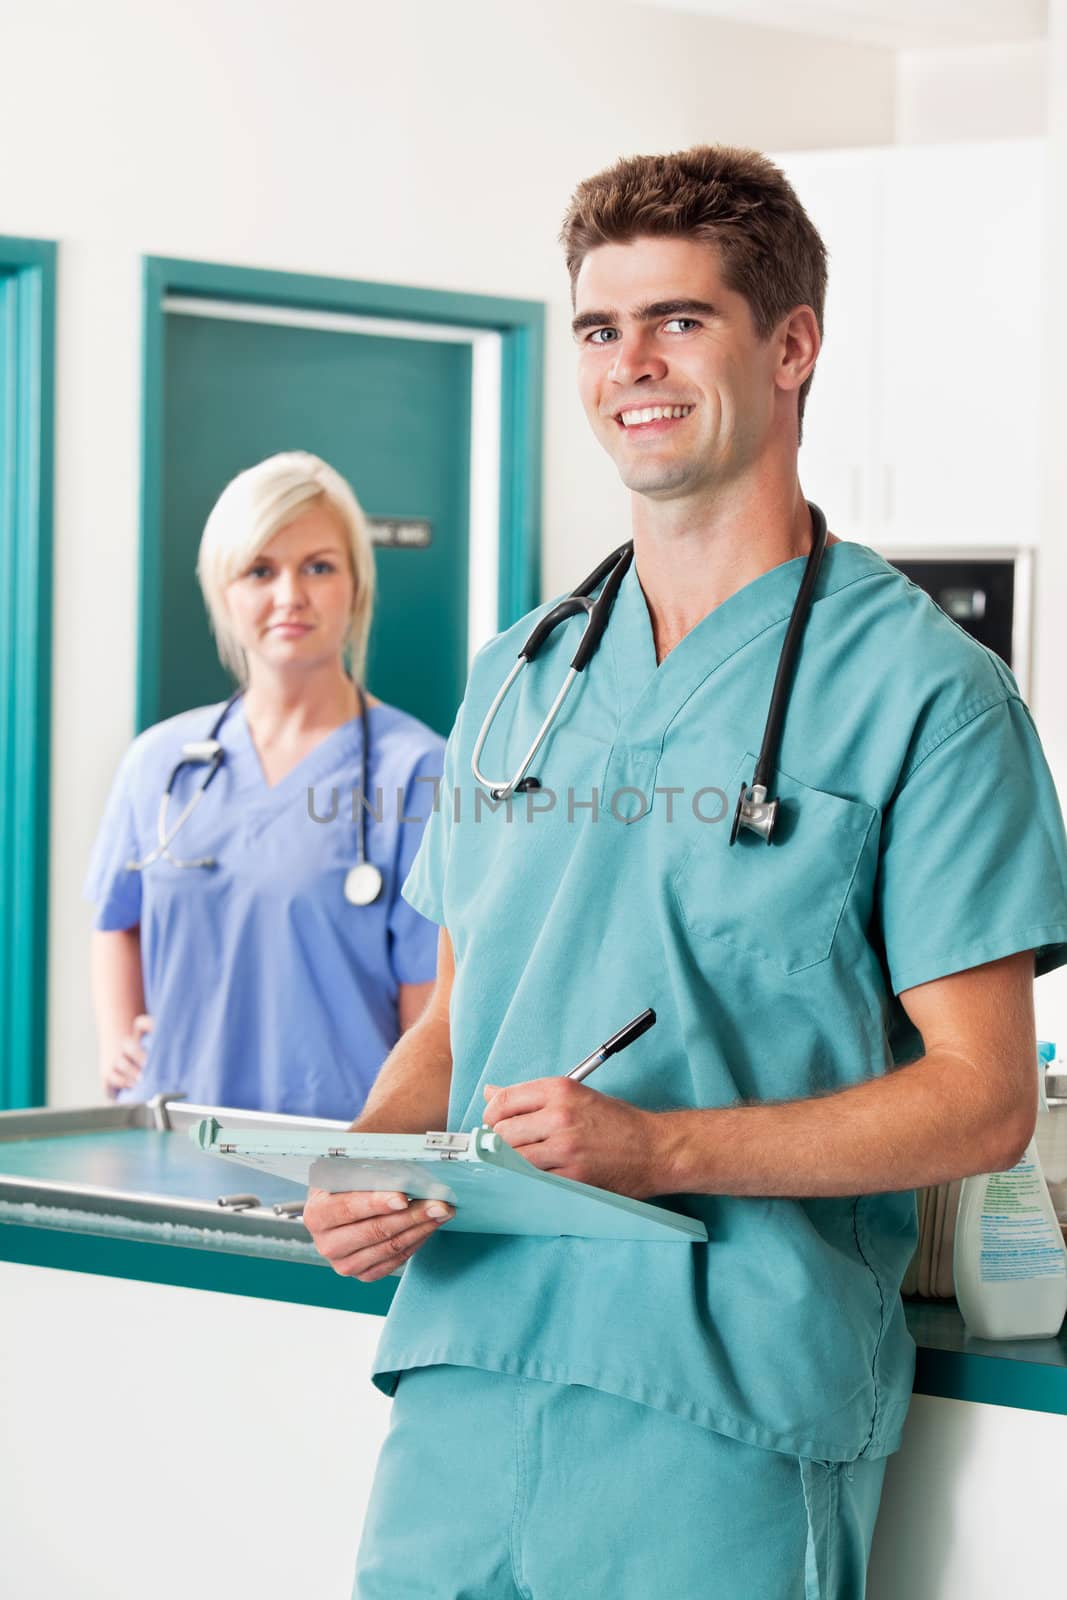 Portrait of smiling male veterinarian with clipboard while assistant in the background